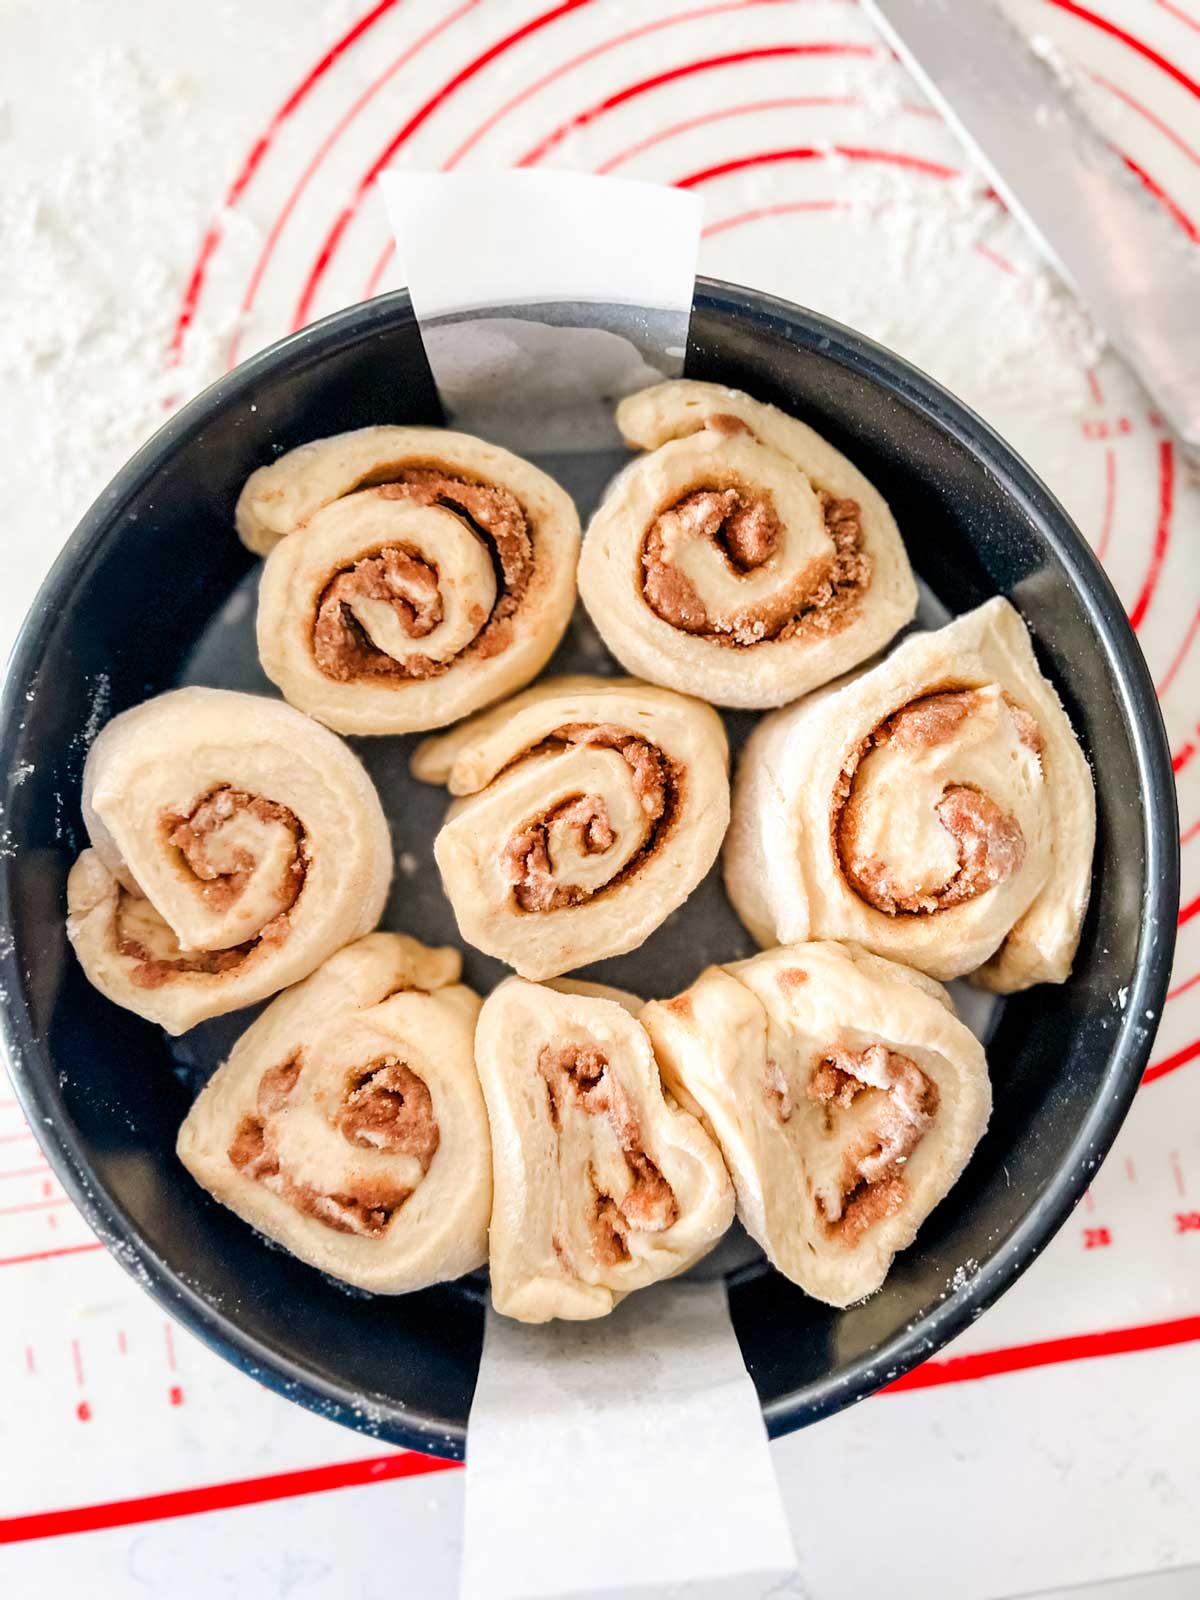 Cinnamon rolls in a cake pan ready to rise.